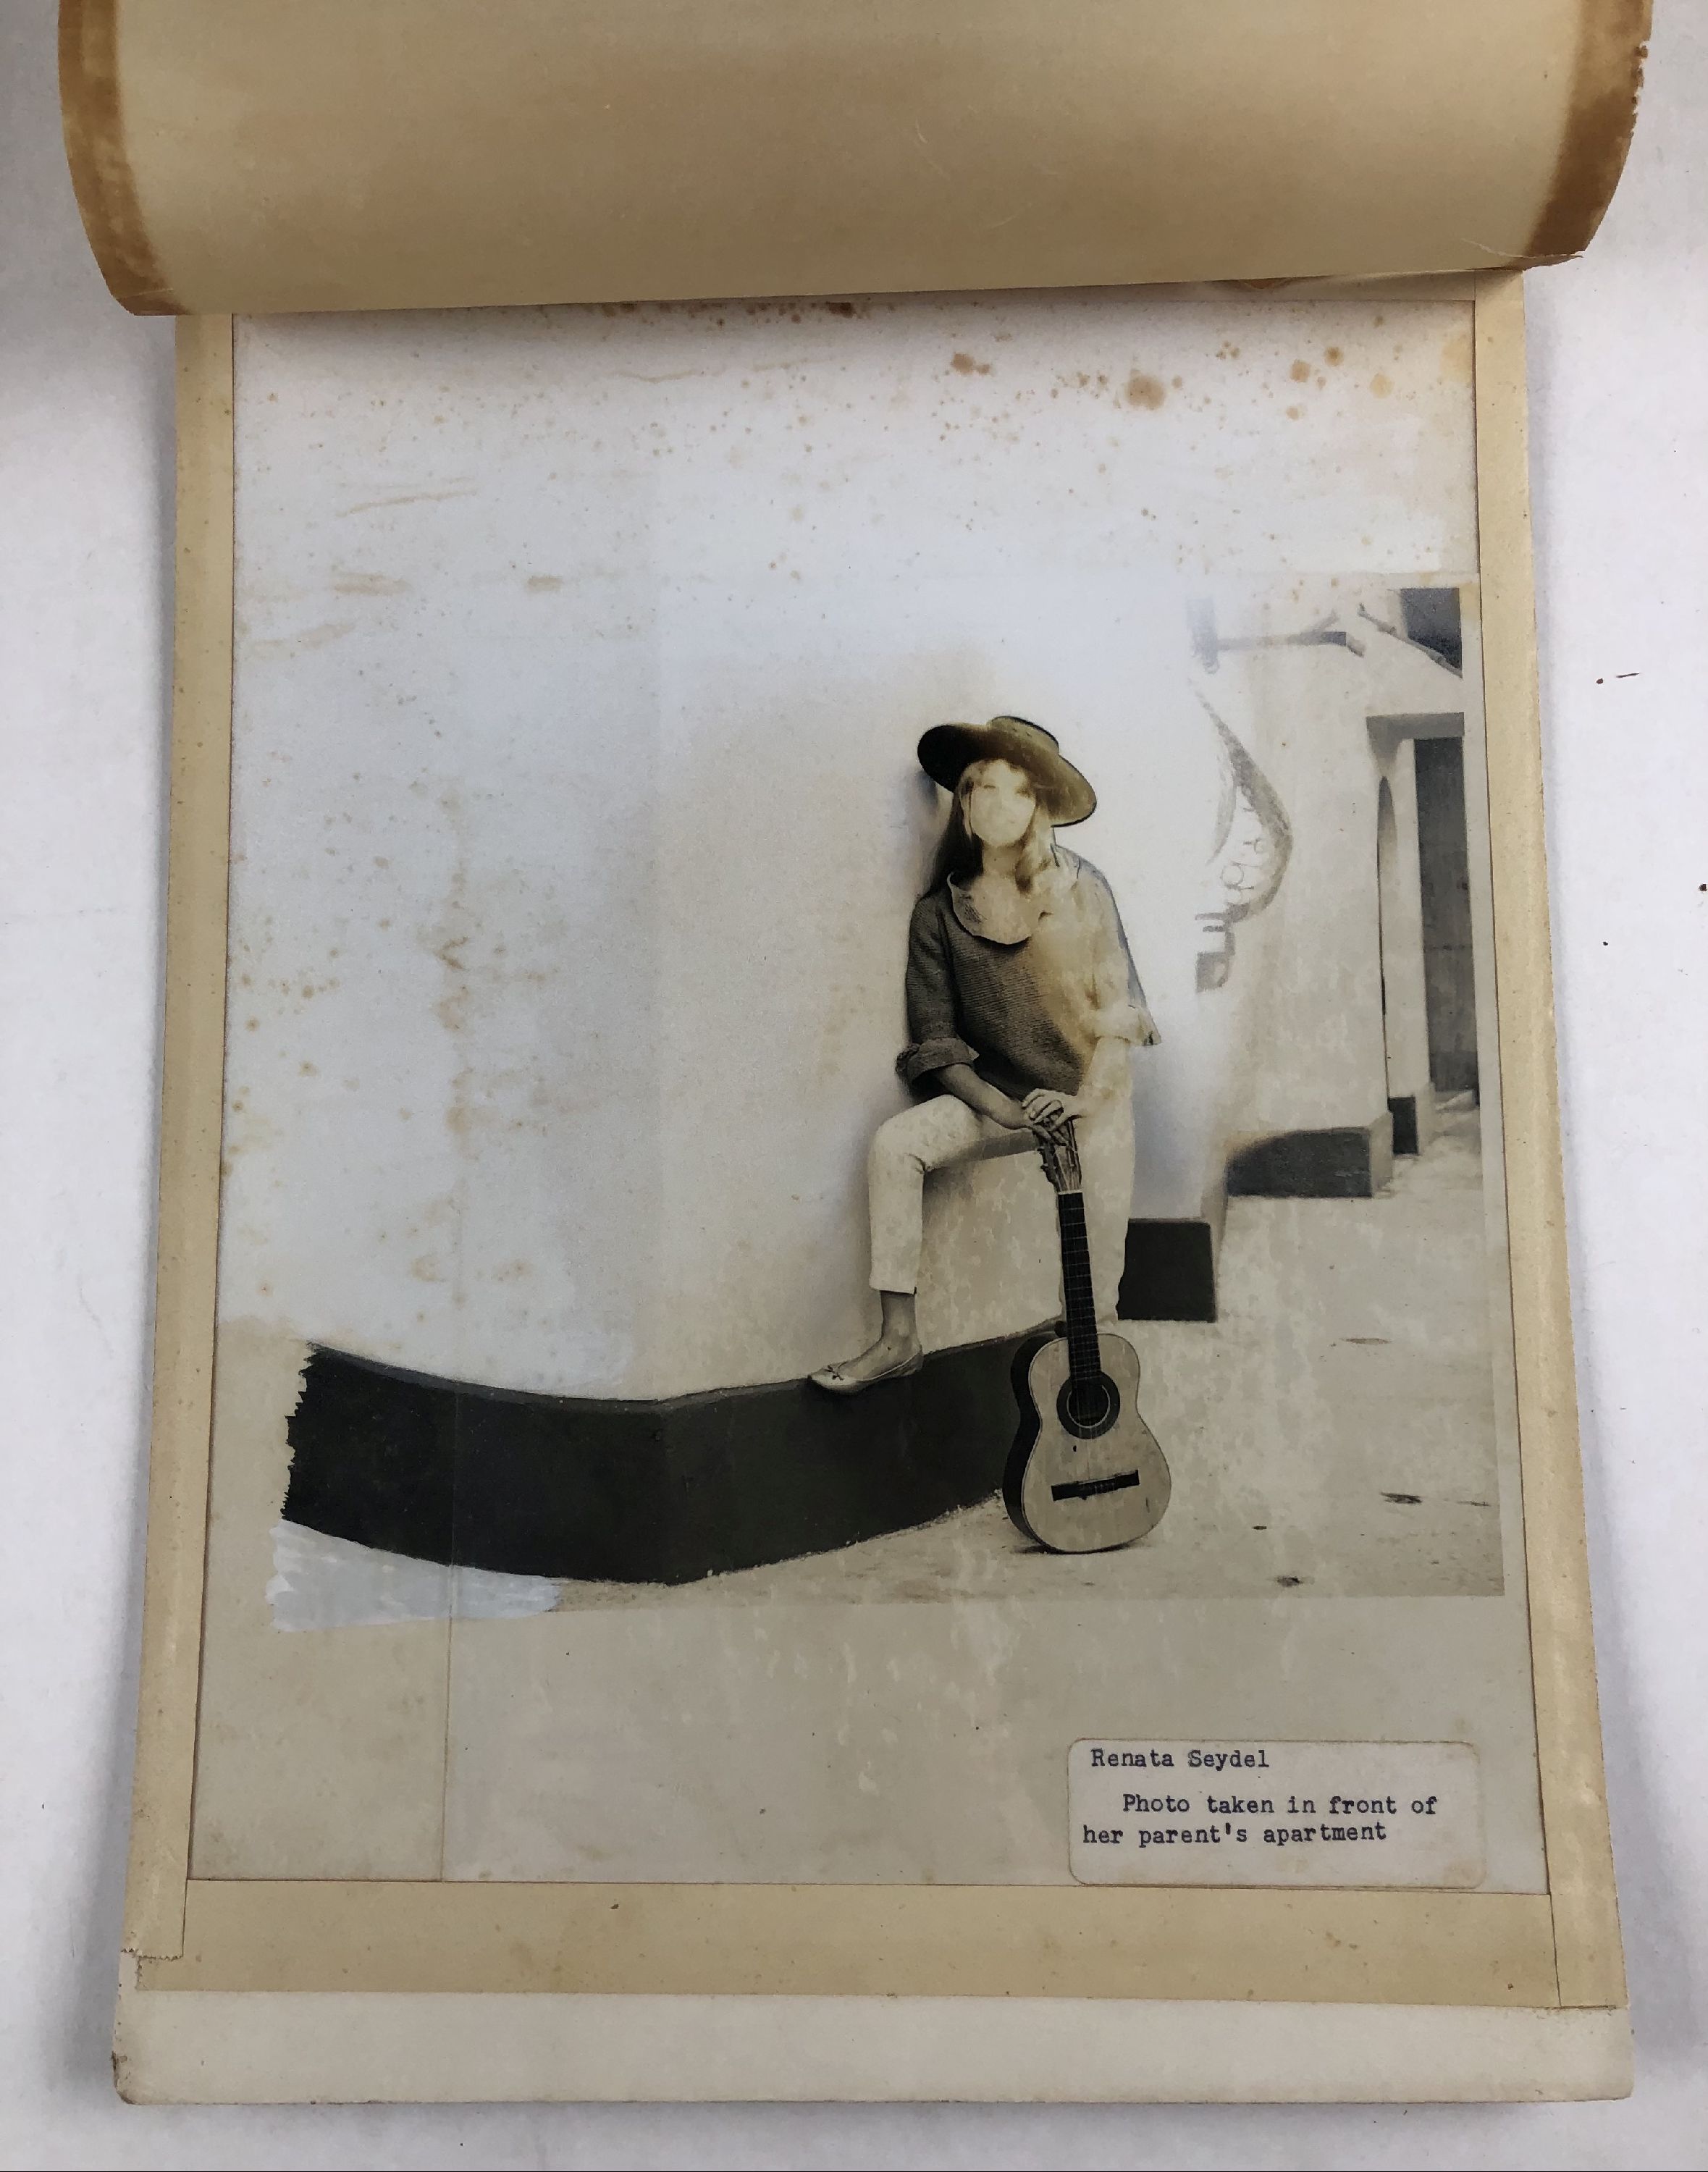 mechanical reproduction with applied handwork of woman standing against a wall with a guitar. Caption reads "Renata Seydel: Photo taken in front of her parent's apartment"